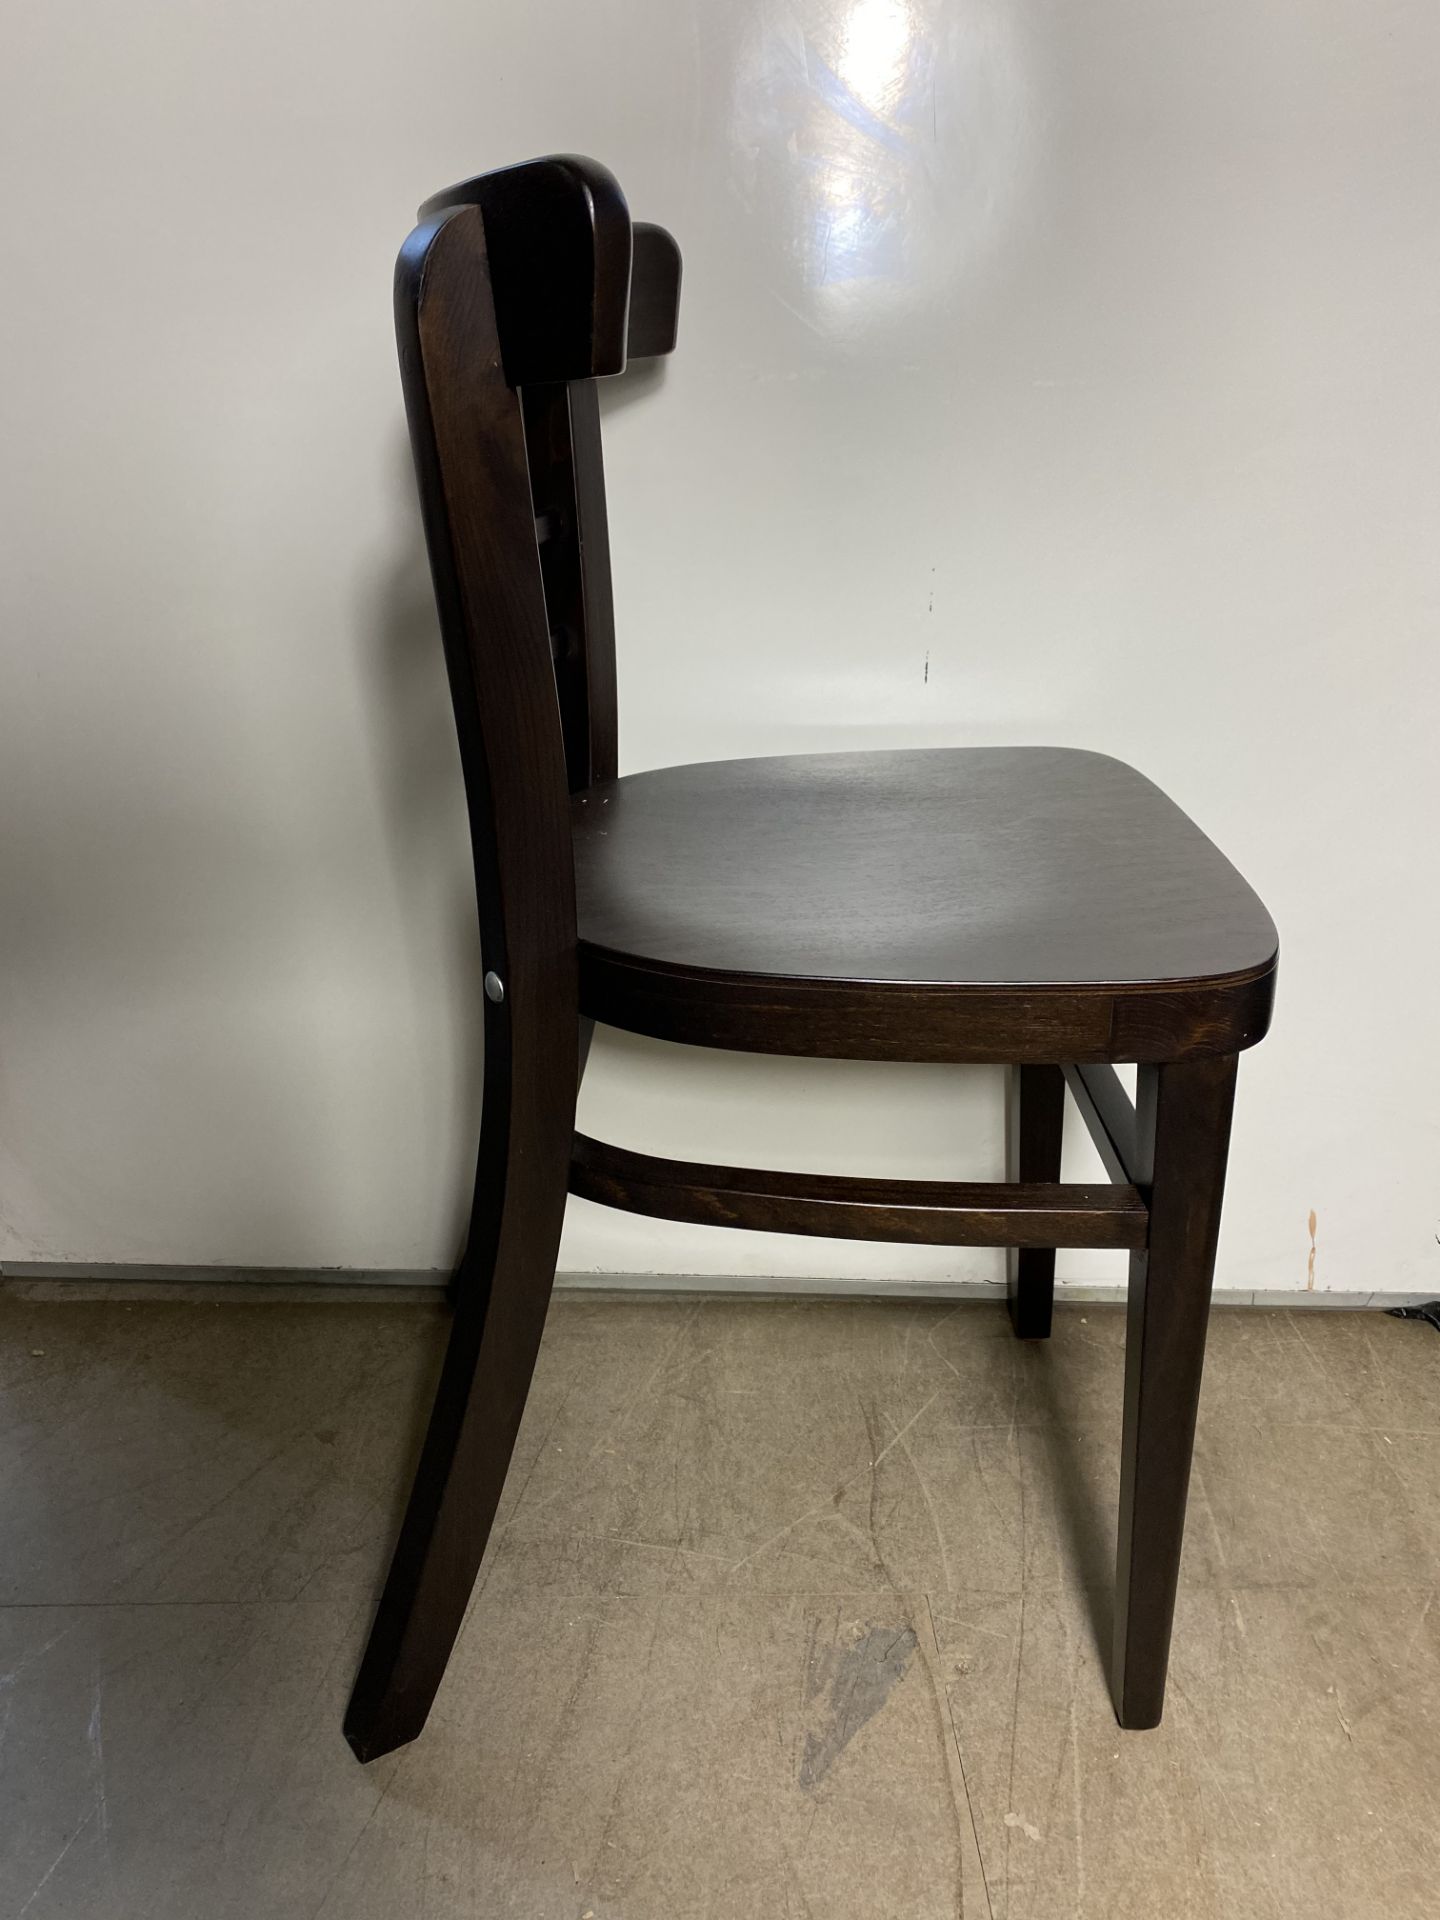 4 x Espresso Side Chairs | BE 3057983 - Image 3 of 6